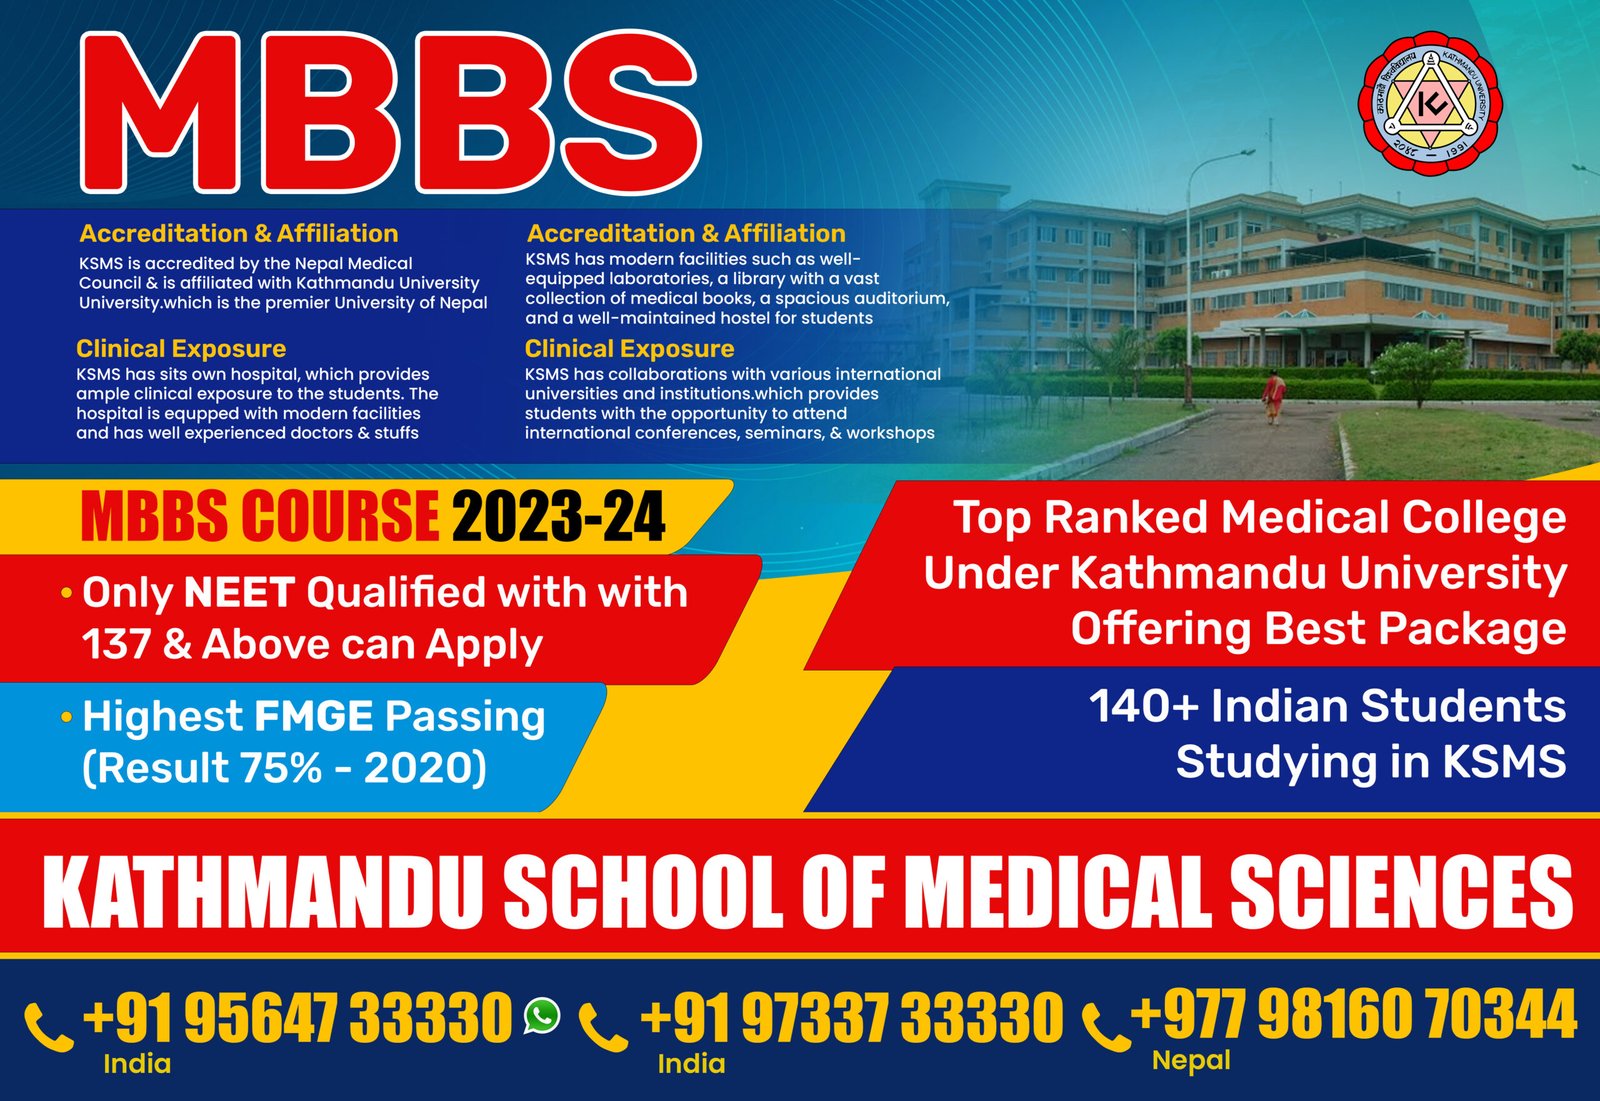 everything-you-need-to-know-about-kathmandu-university-school-of-medical-sciences-in-2023